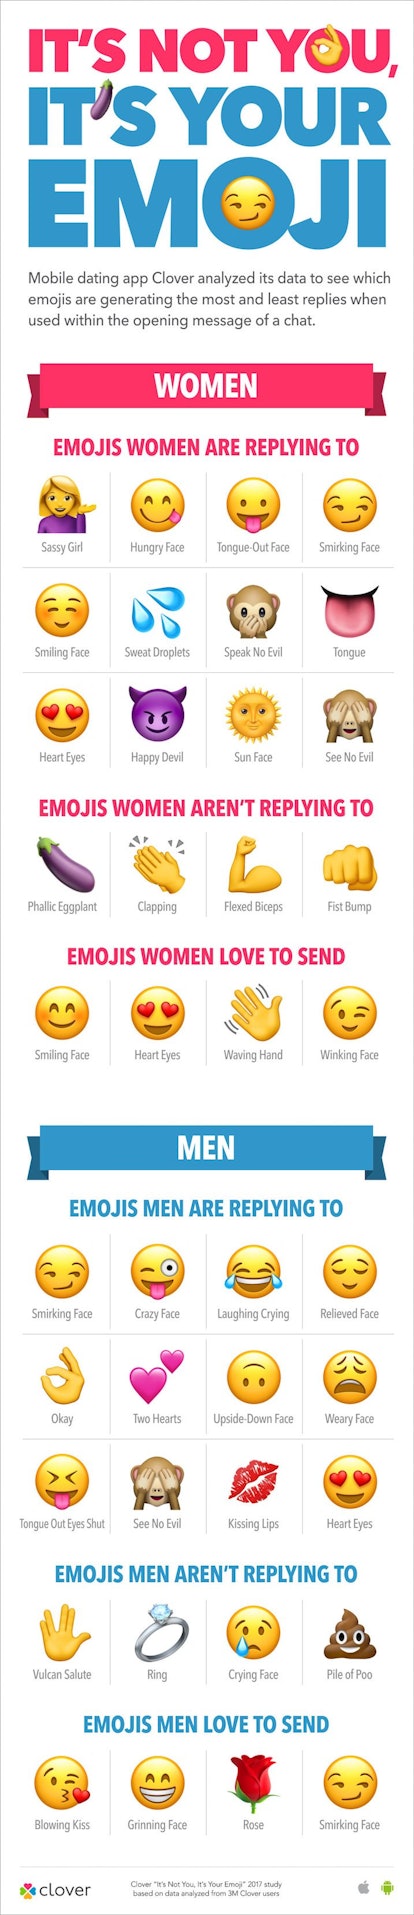 If You Want To Get Laid, You Should Be Using These Emojis While Texting